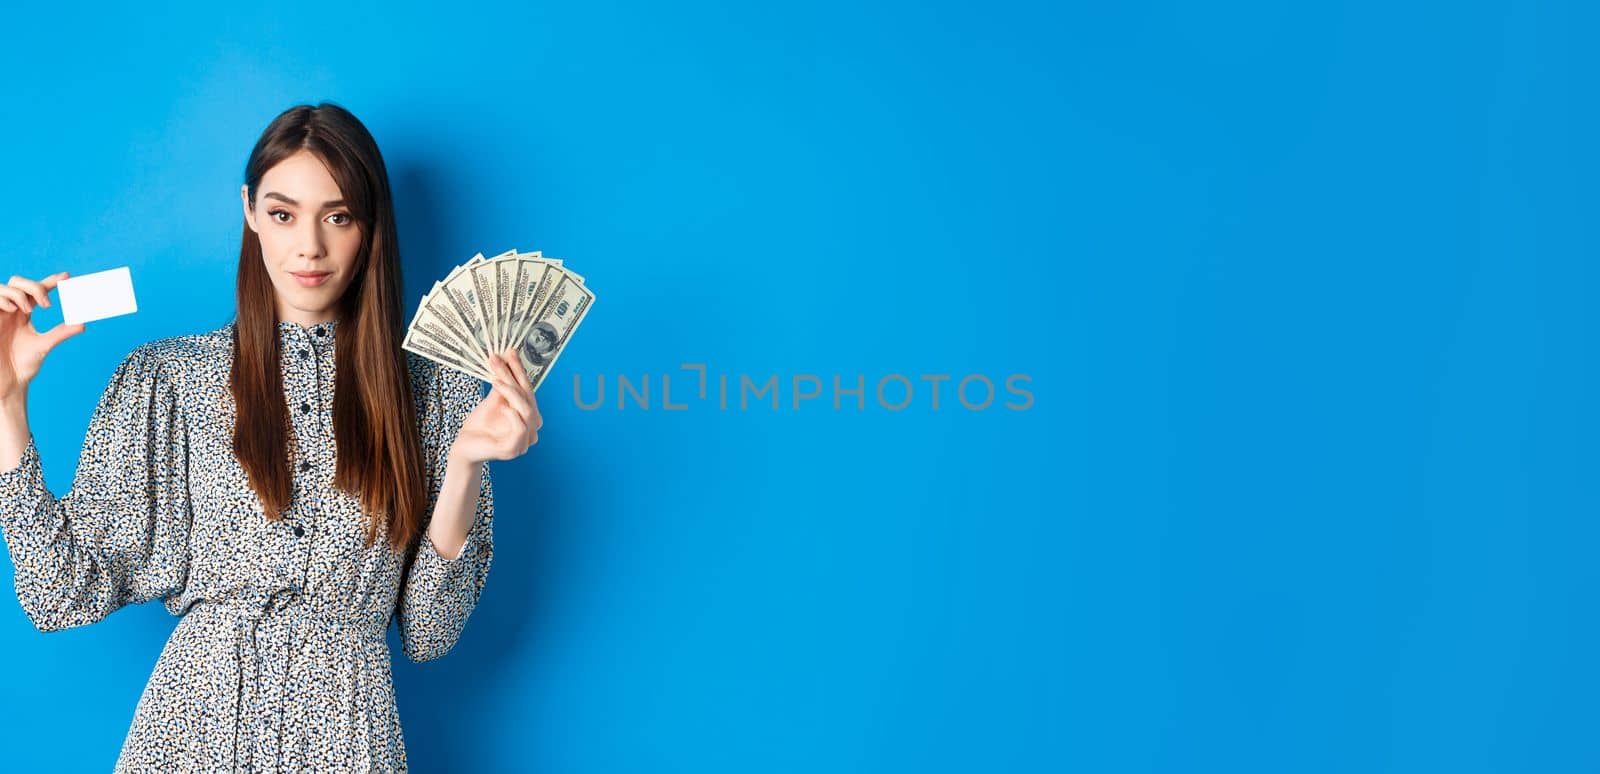 Shopping. Elegant sassy woman with dollar bills money and plastic credit card, looking confident at camera, blue background.